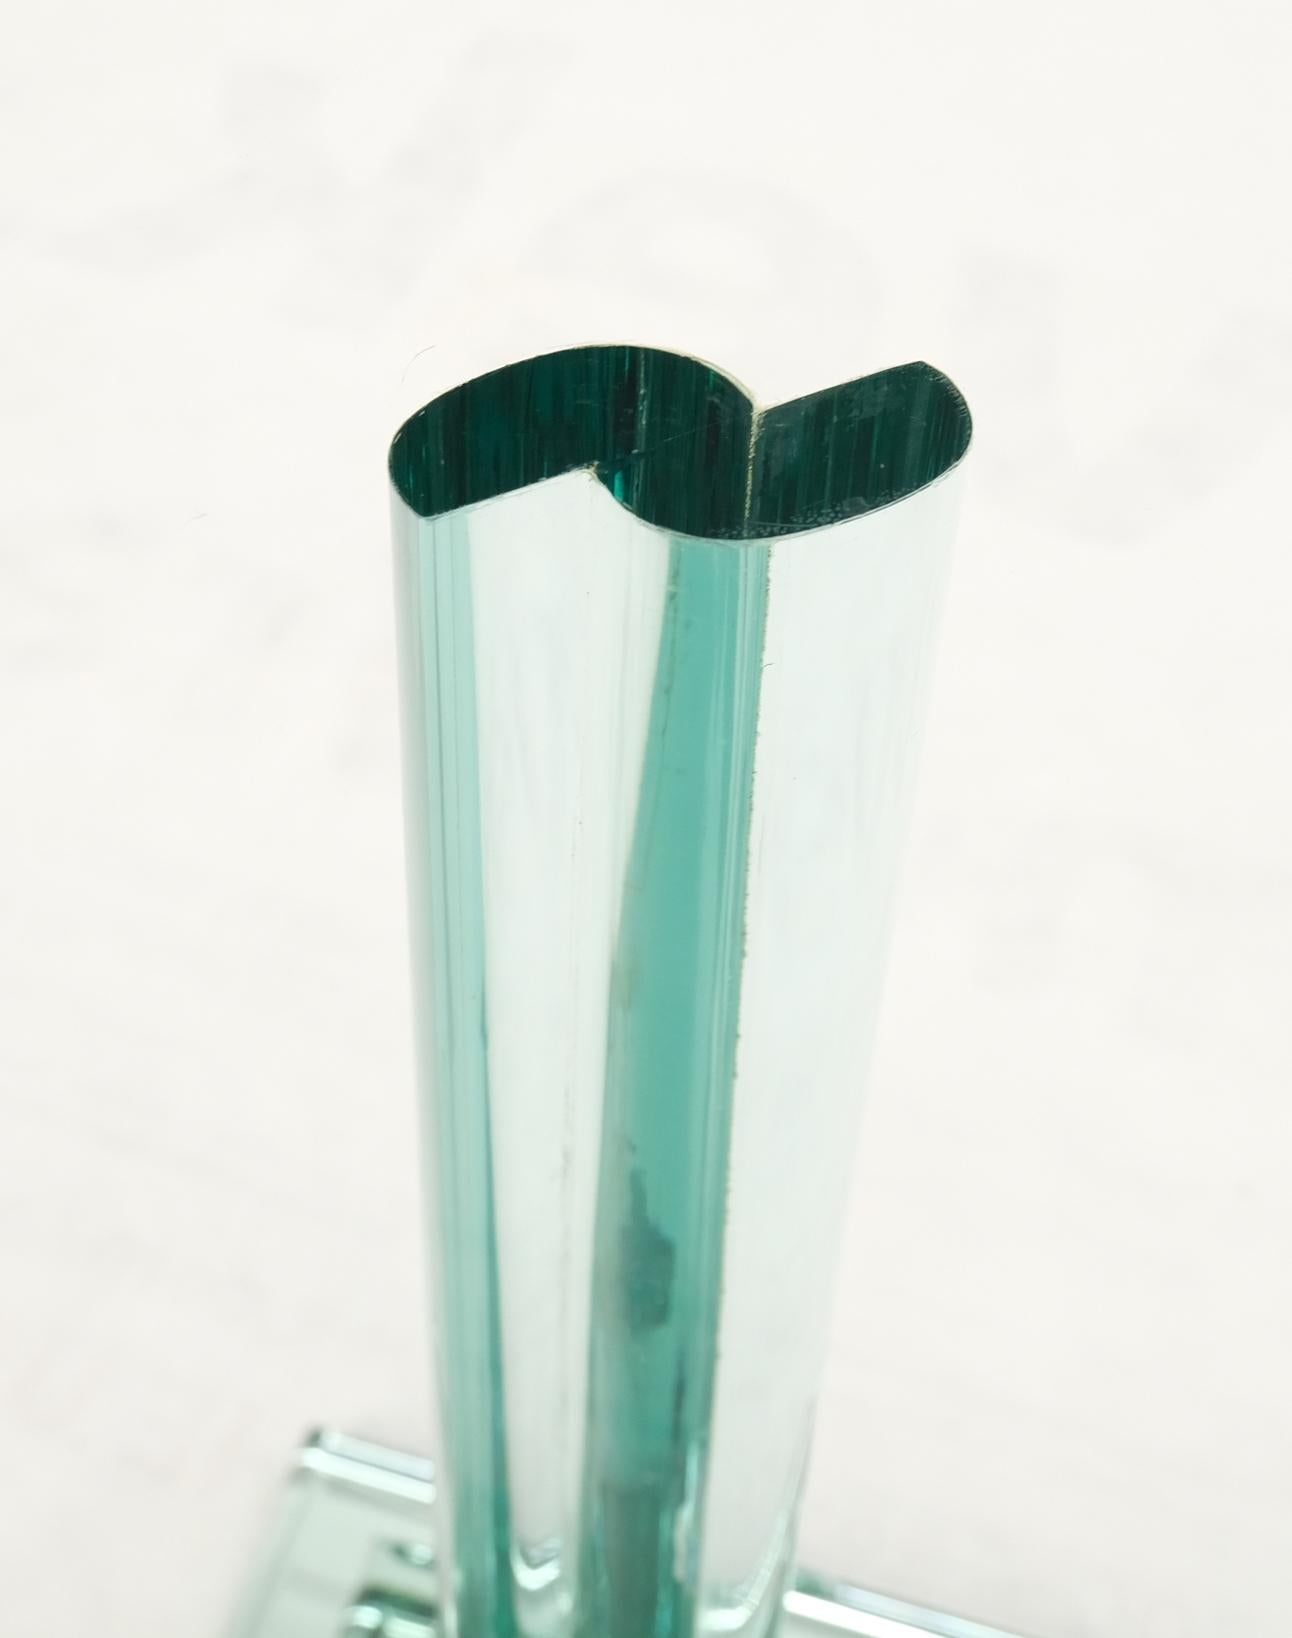 All solid glass green tint round glass end side lamp occasional table stand pedestal mid century.